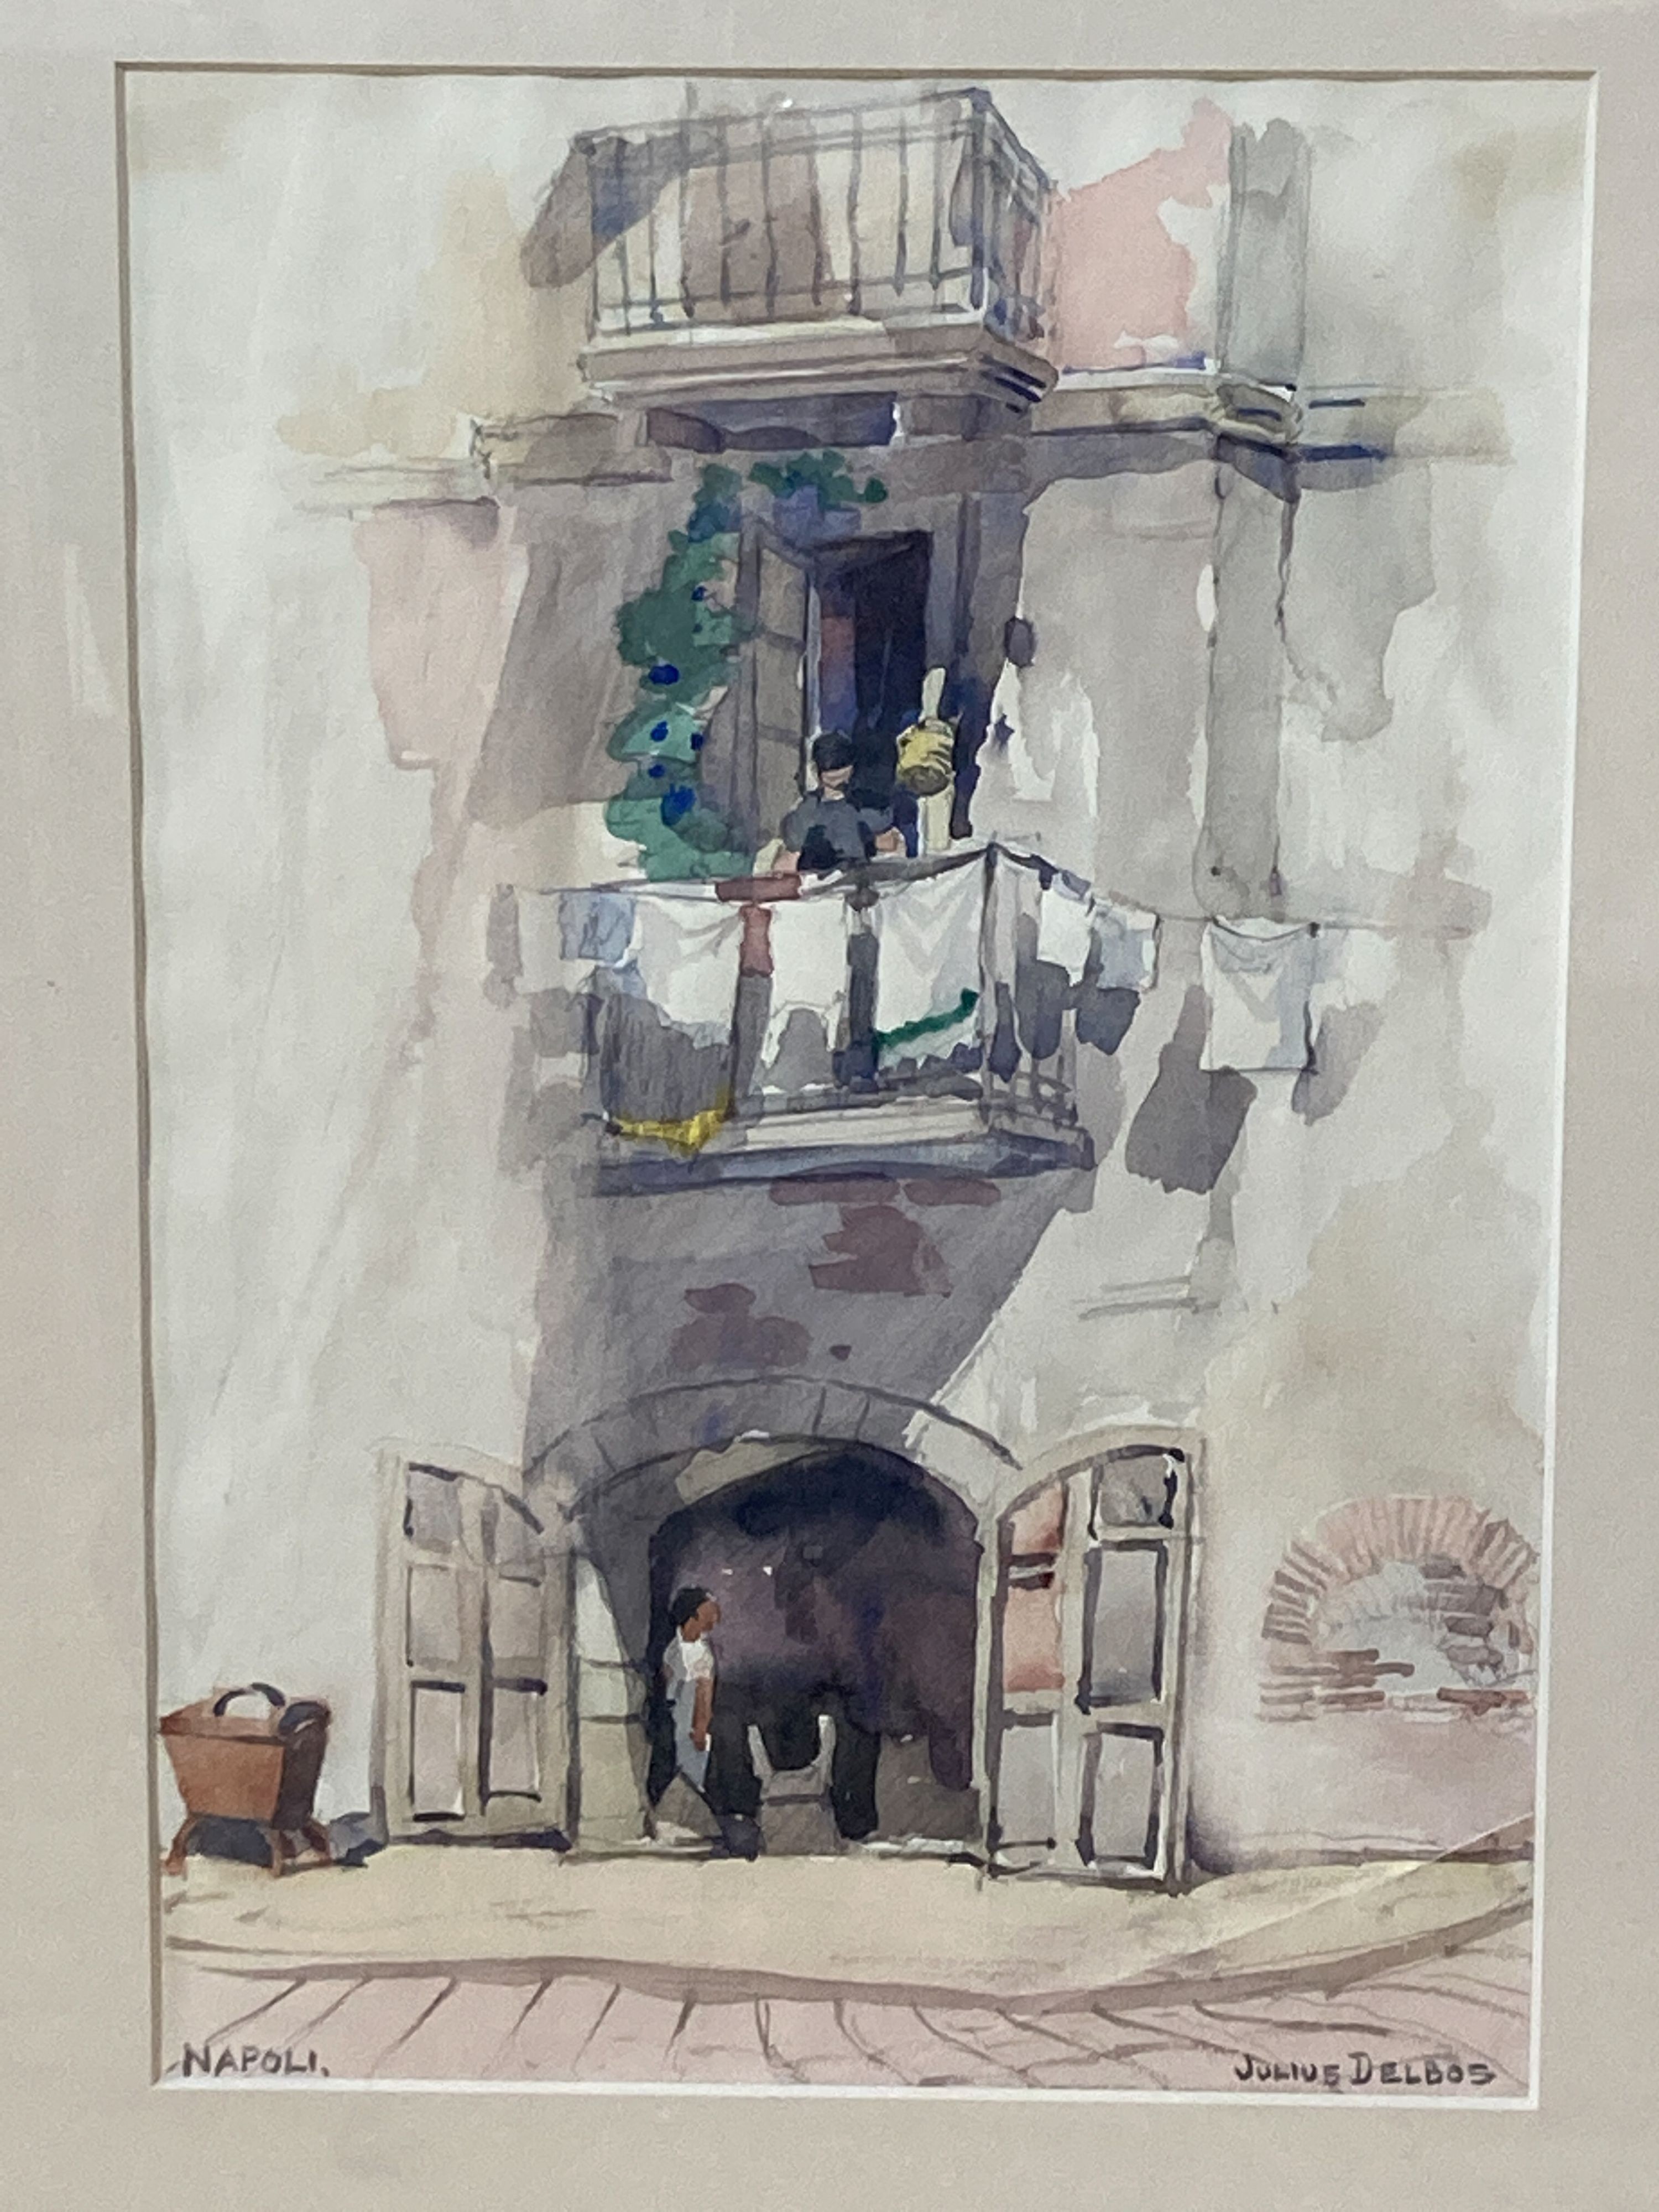 Julius Delos (1879-1970), four watercolours, Views in Naples, Rome and Venice, signed, largest 30 x - Image 3 of 7